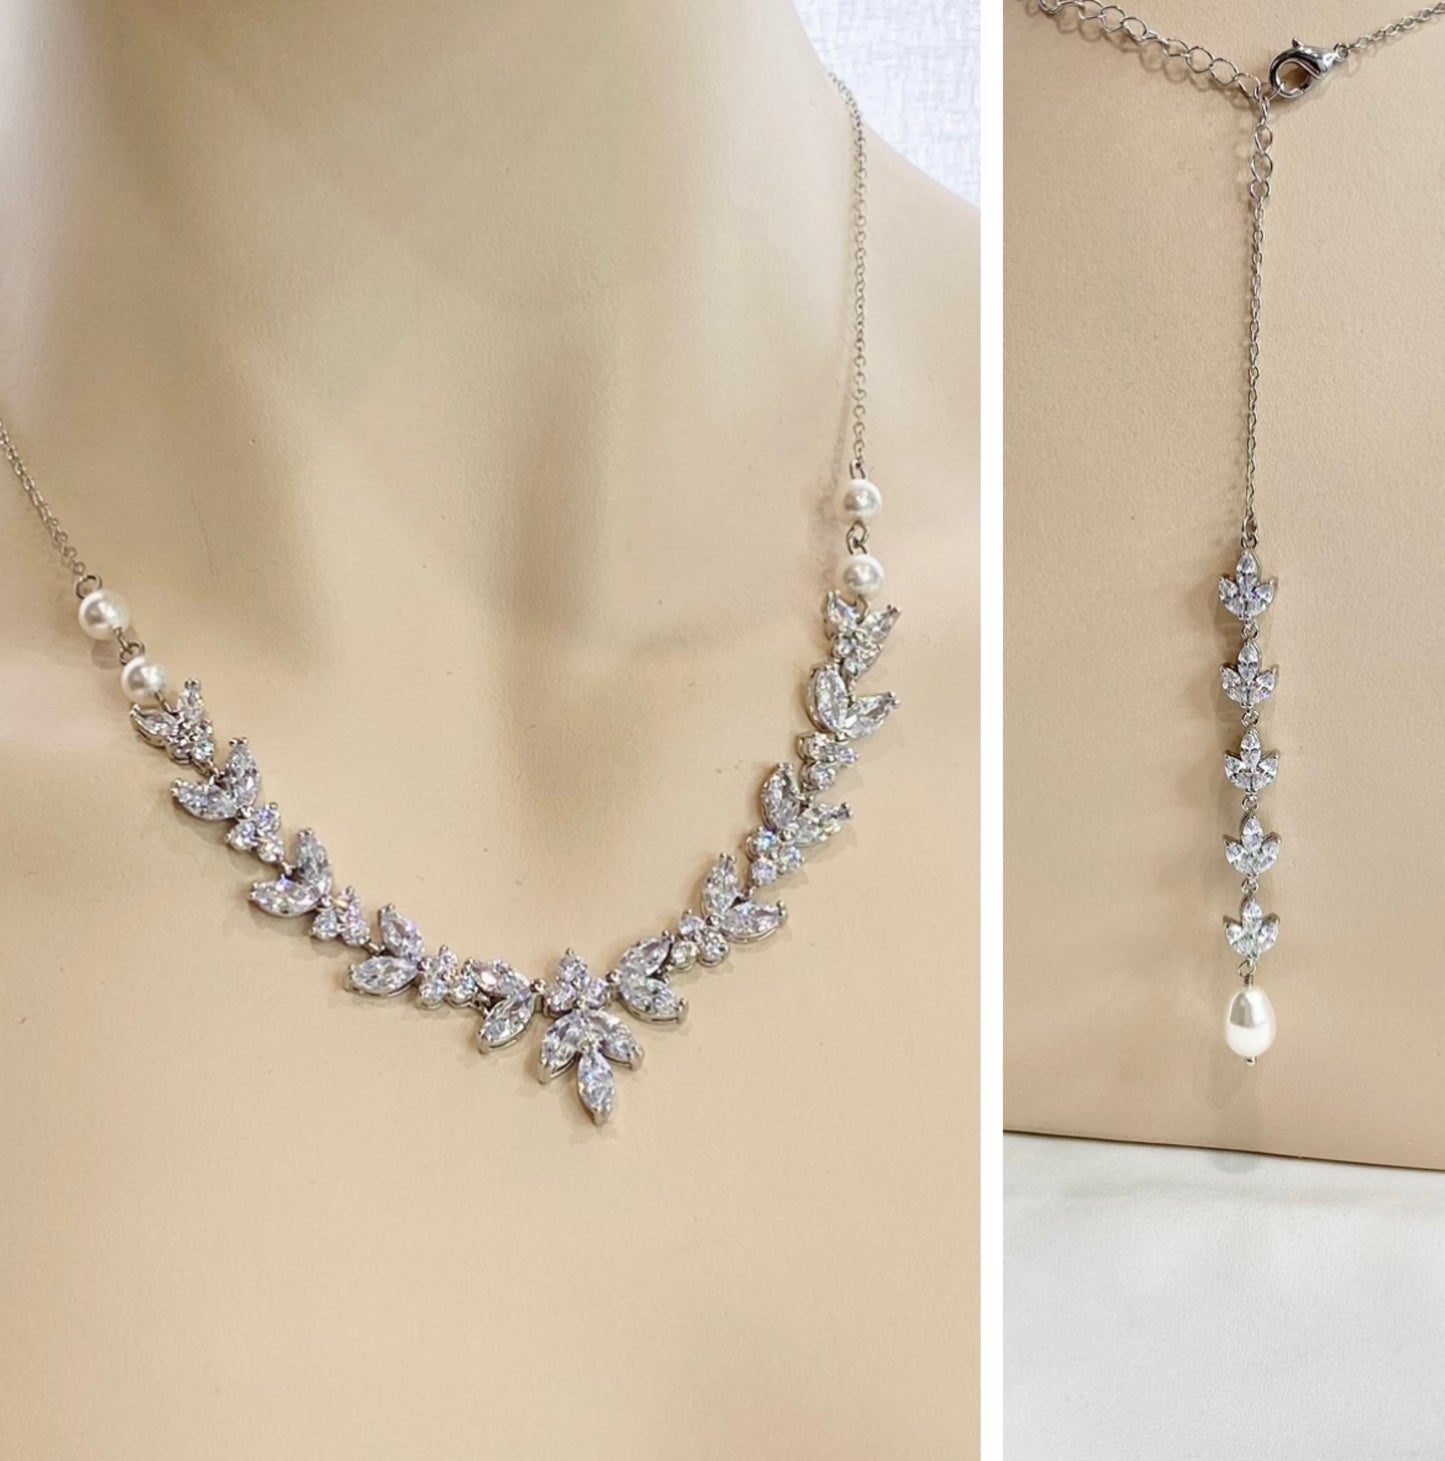 Paige 2pcs CZ Floral and Pearl Backdrop Necklace and Earrings Set